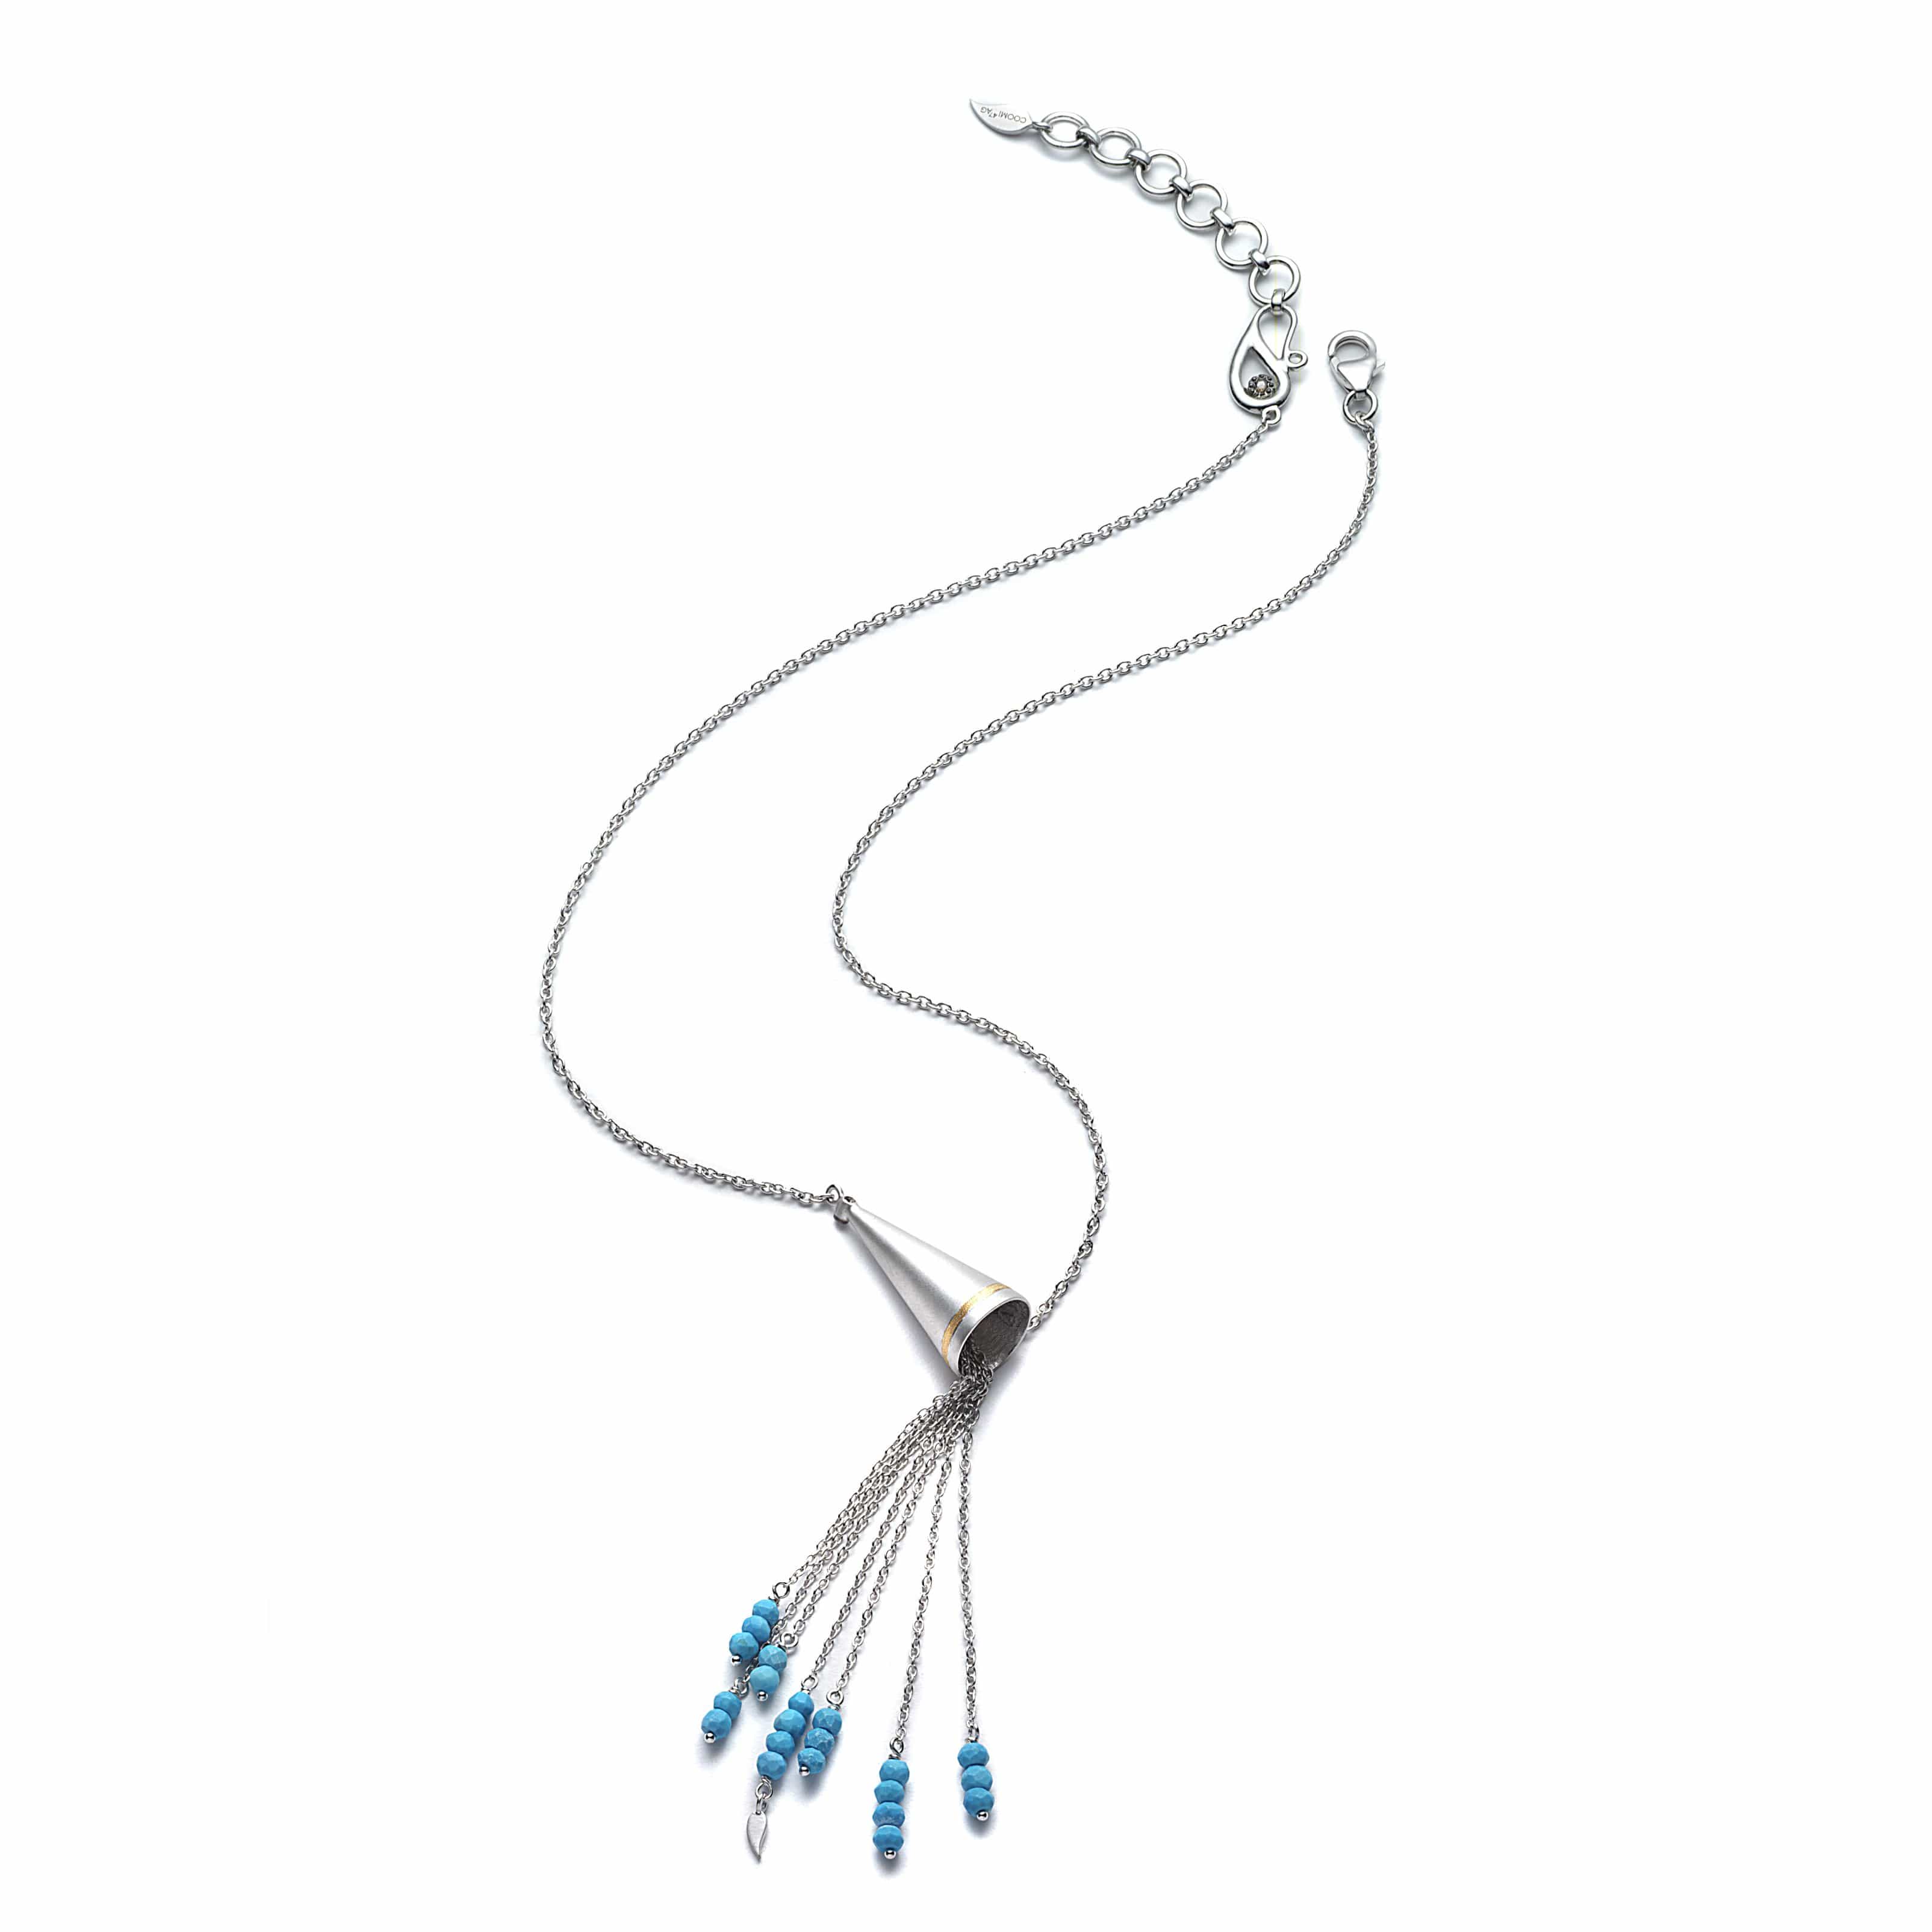 Vitality 20K Silver Necklace with Cone and Turquoise Tassel - Coomi